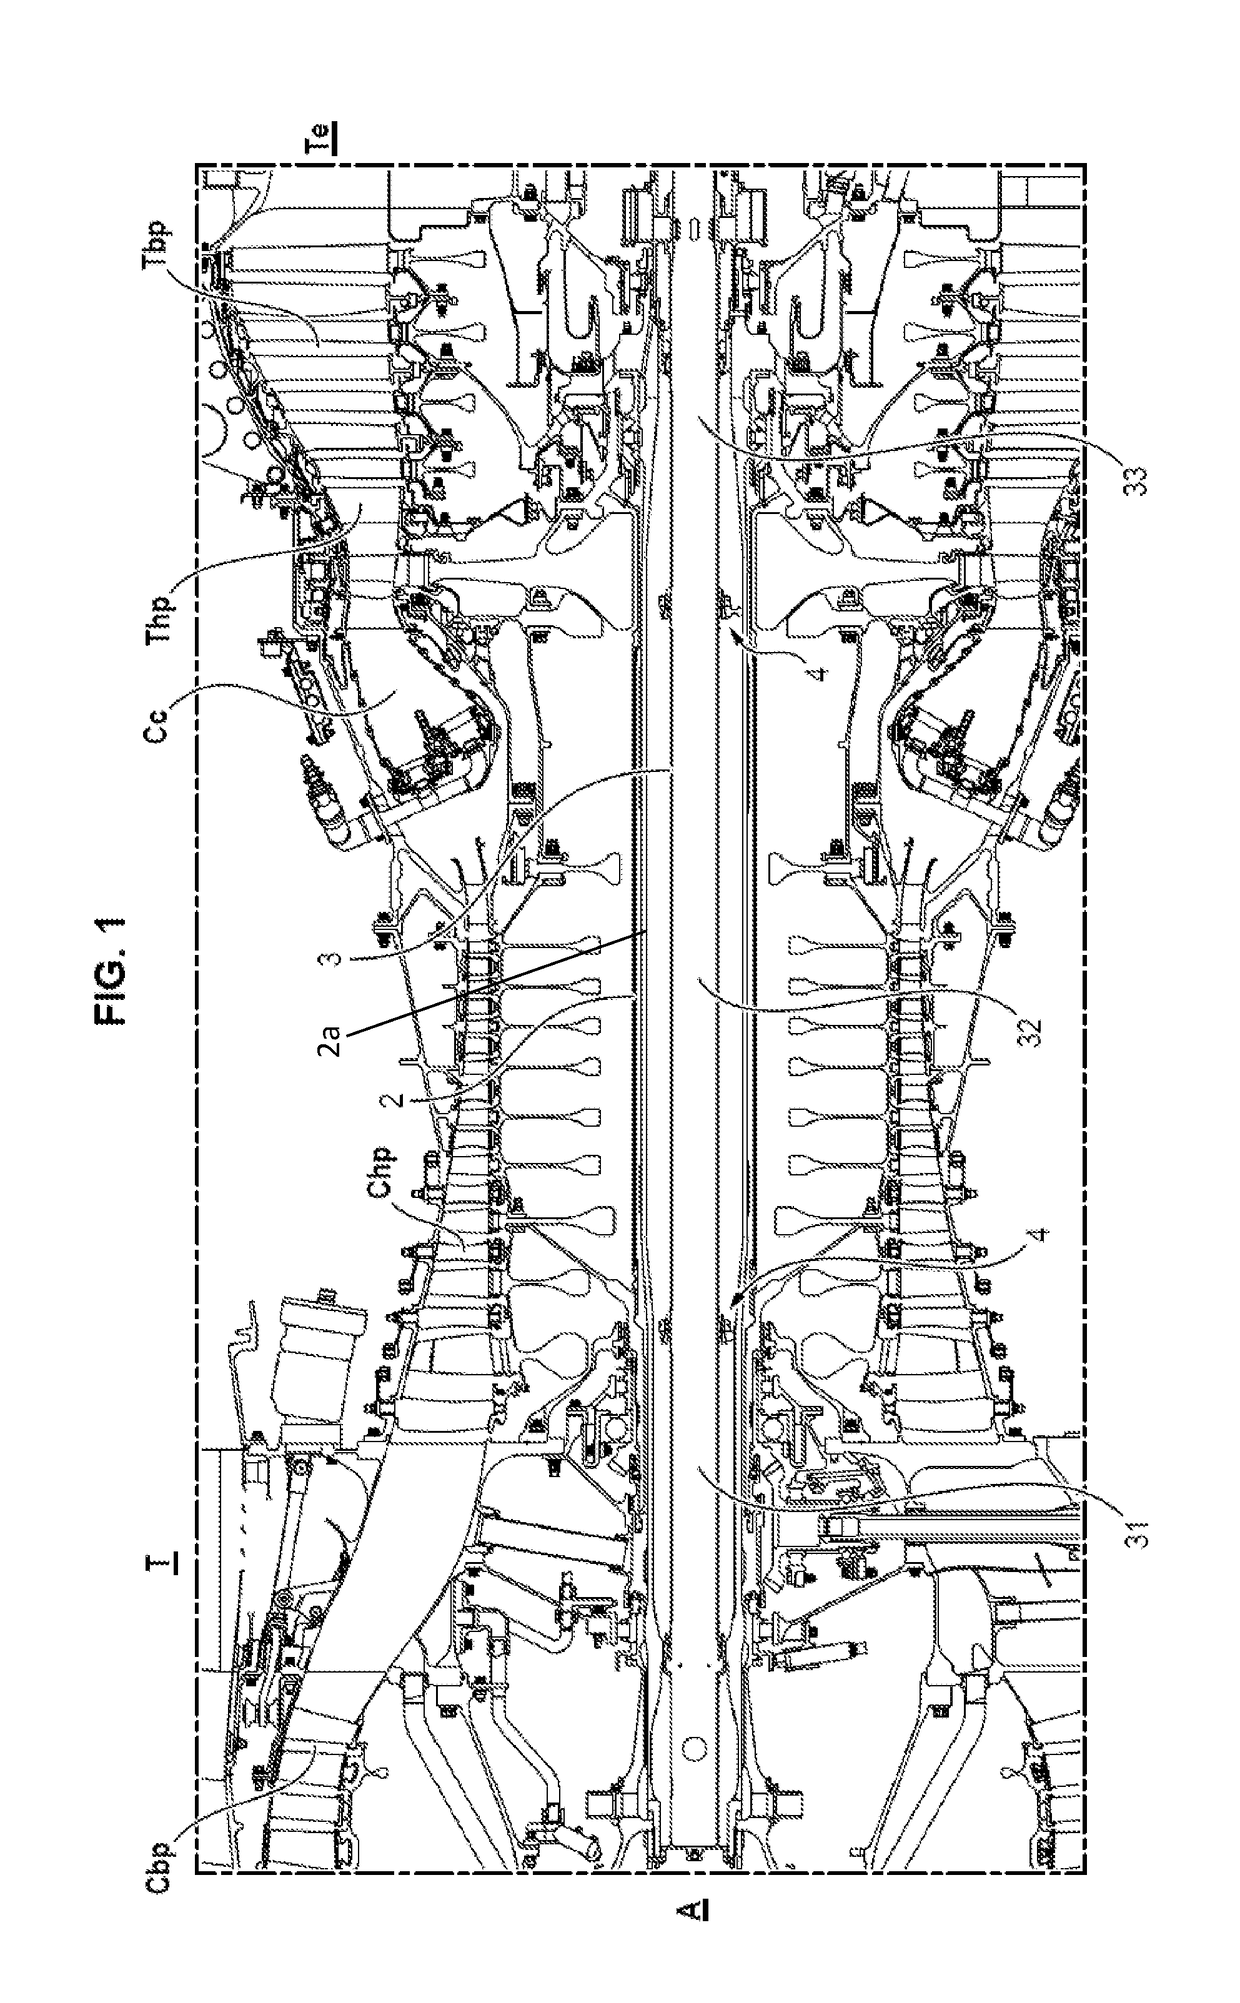 Support providing a complete connection between a turbine shaft and a degassing pipe of a turbojet